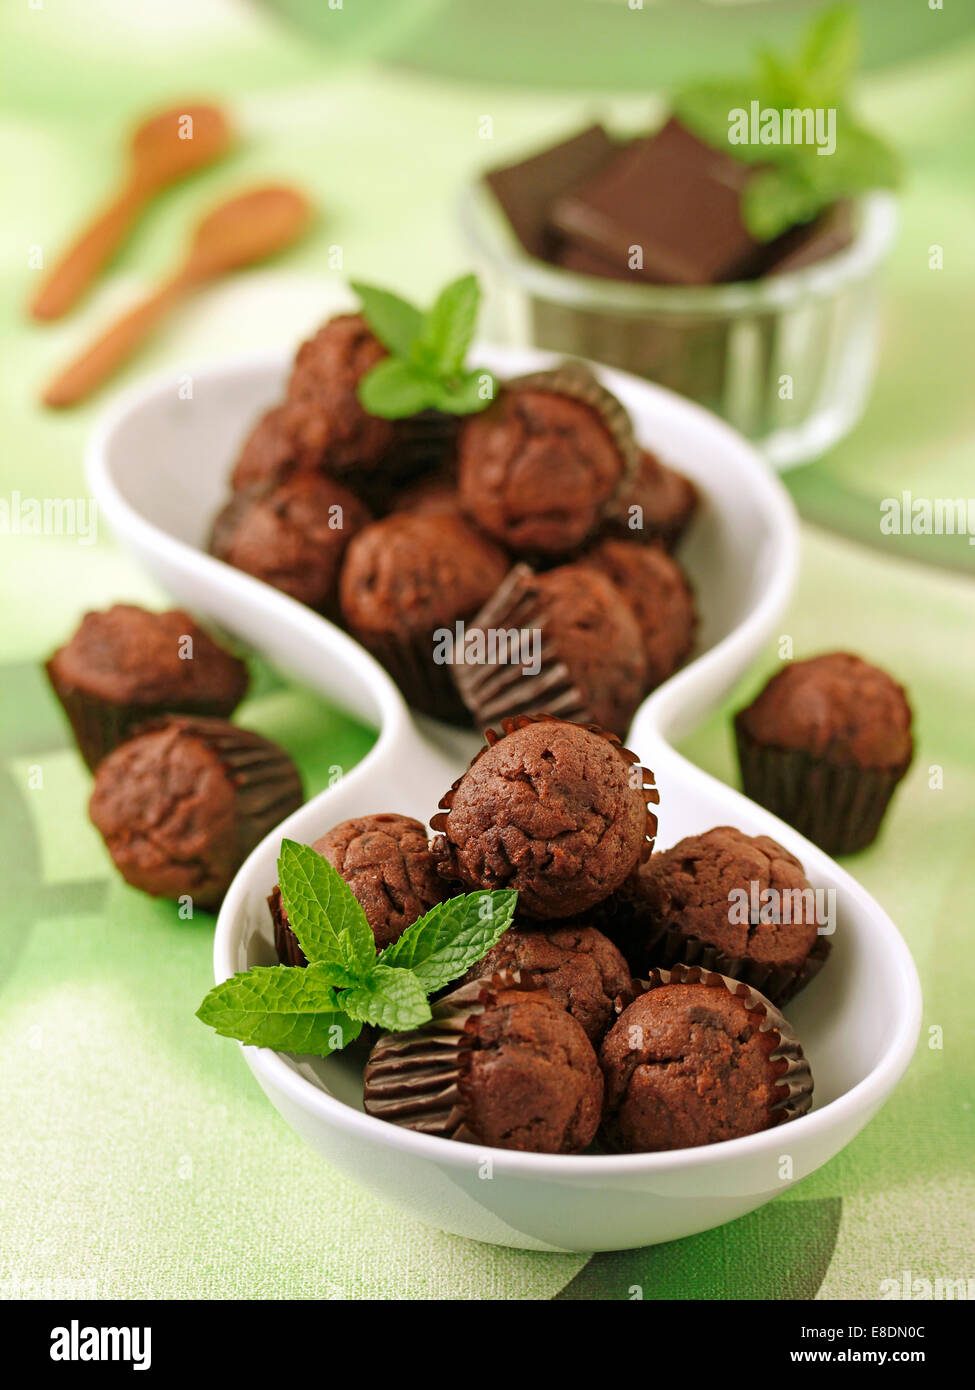 Mini muffins with chocolate. Recipe available. Stock Photo